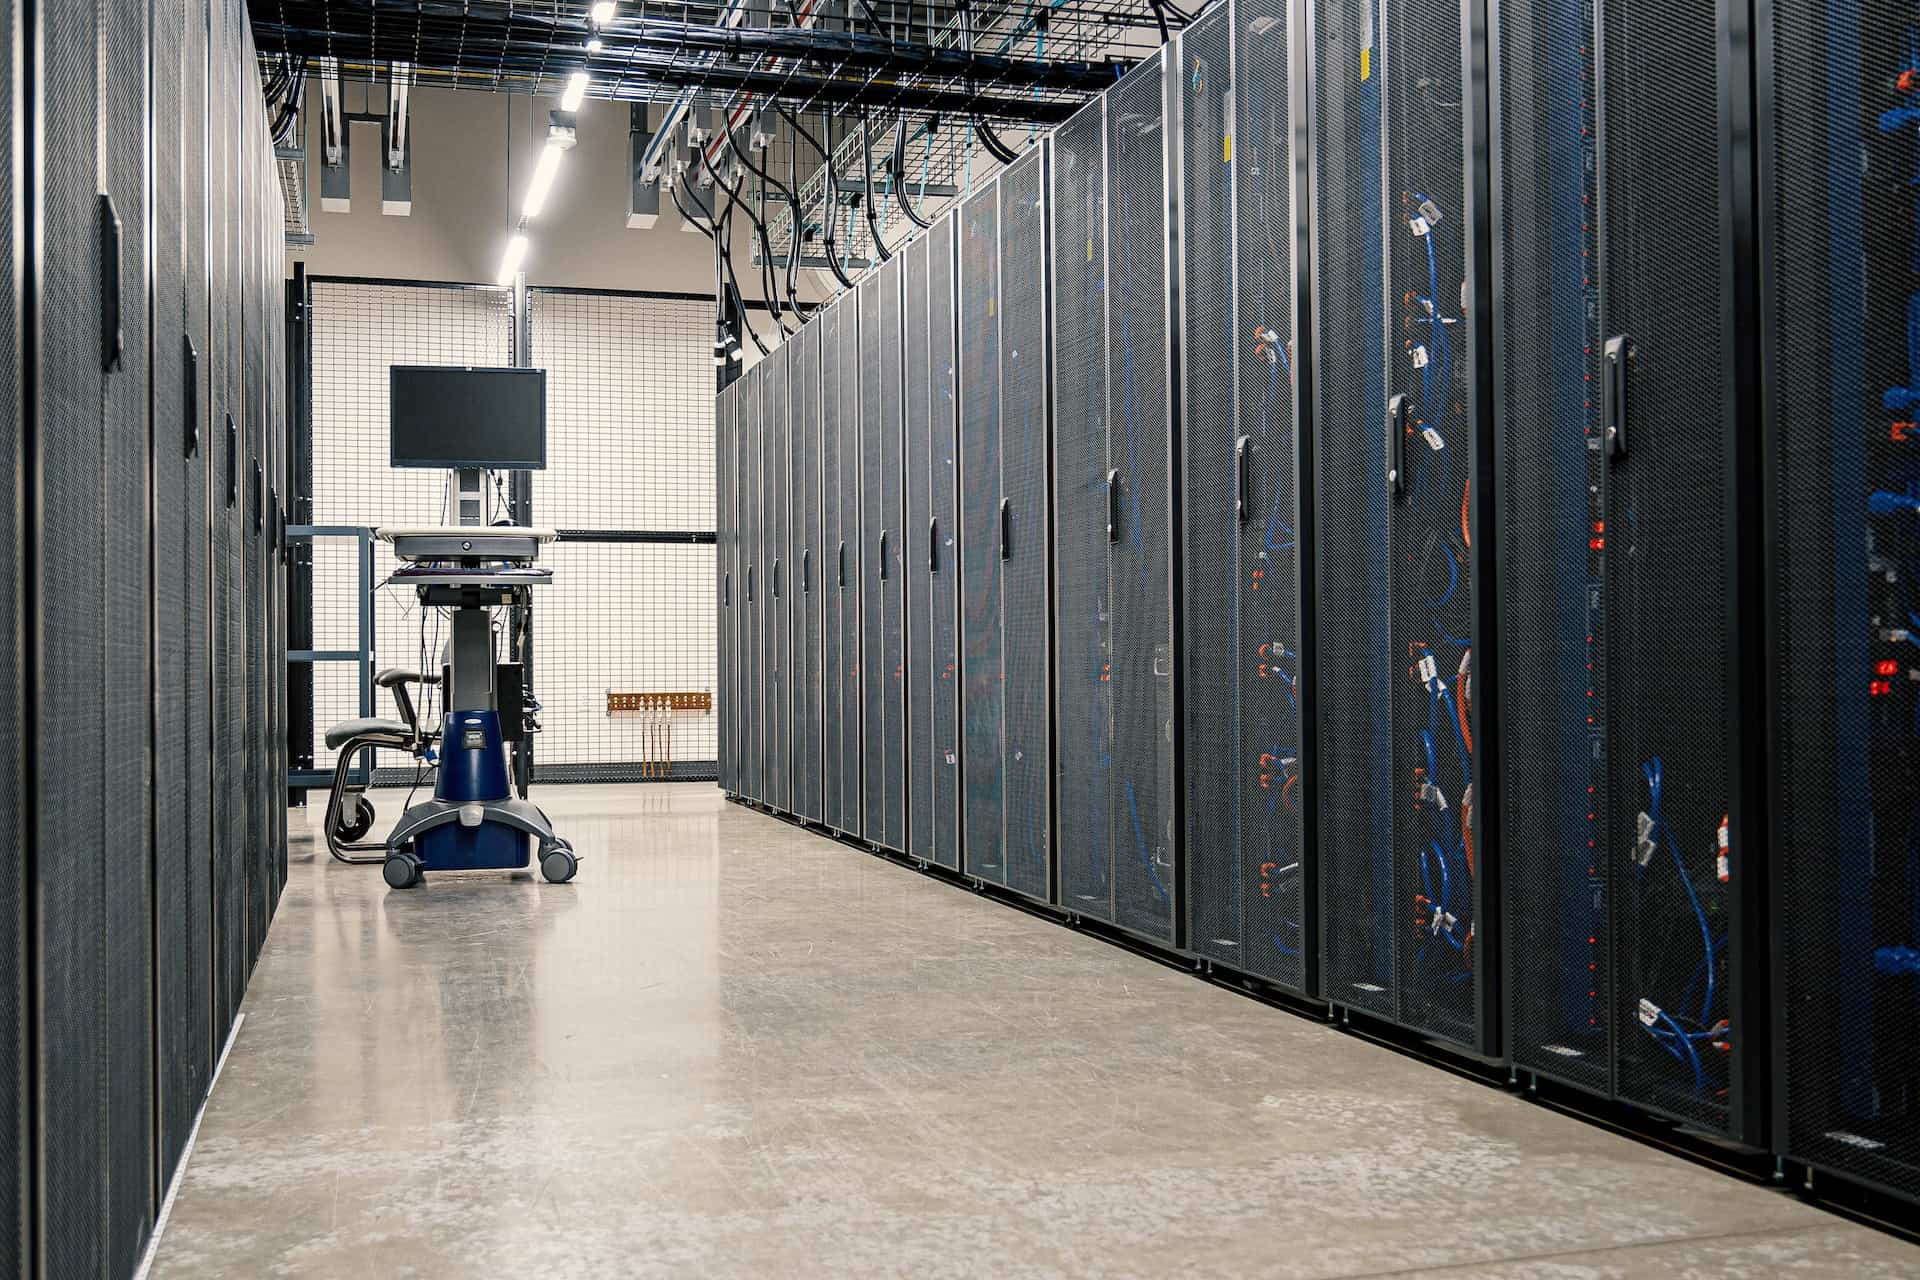 a picture of racks in a data center with a crash cart